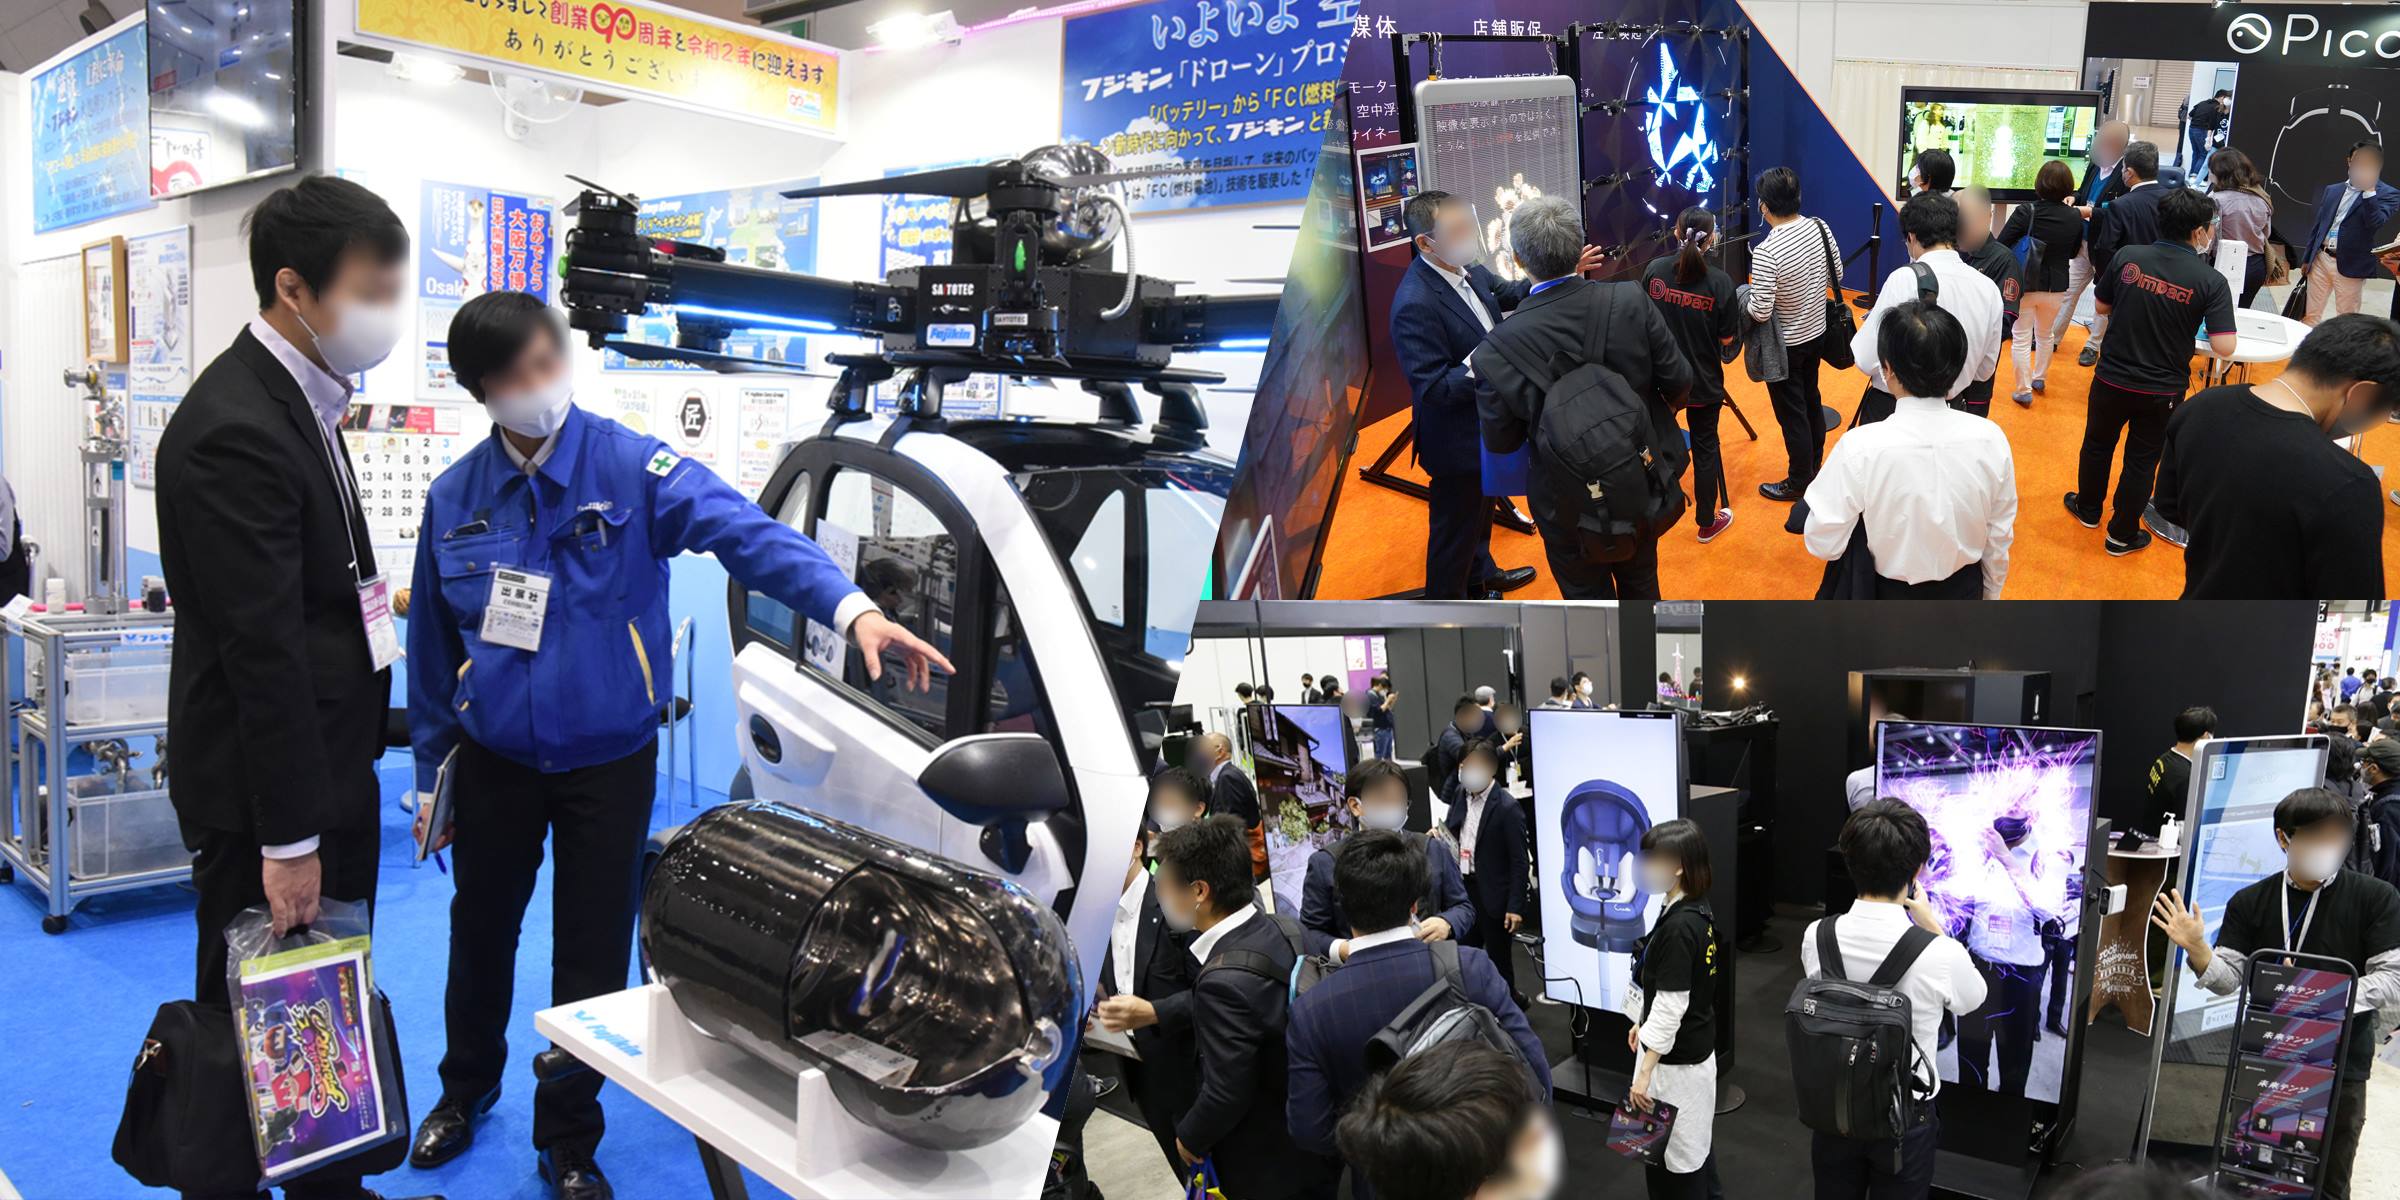 20-facts-about-digital-content-expo-tokyo-d-code